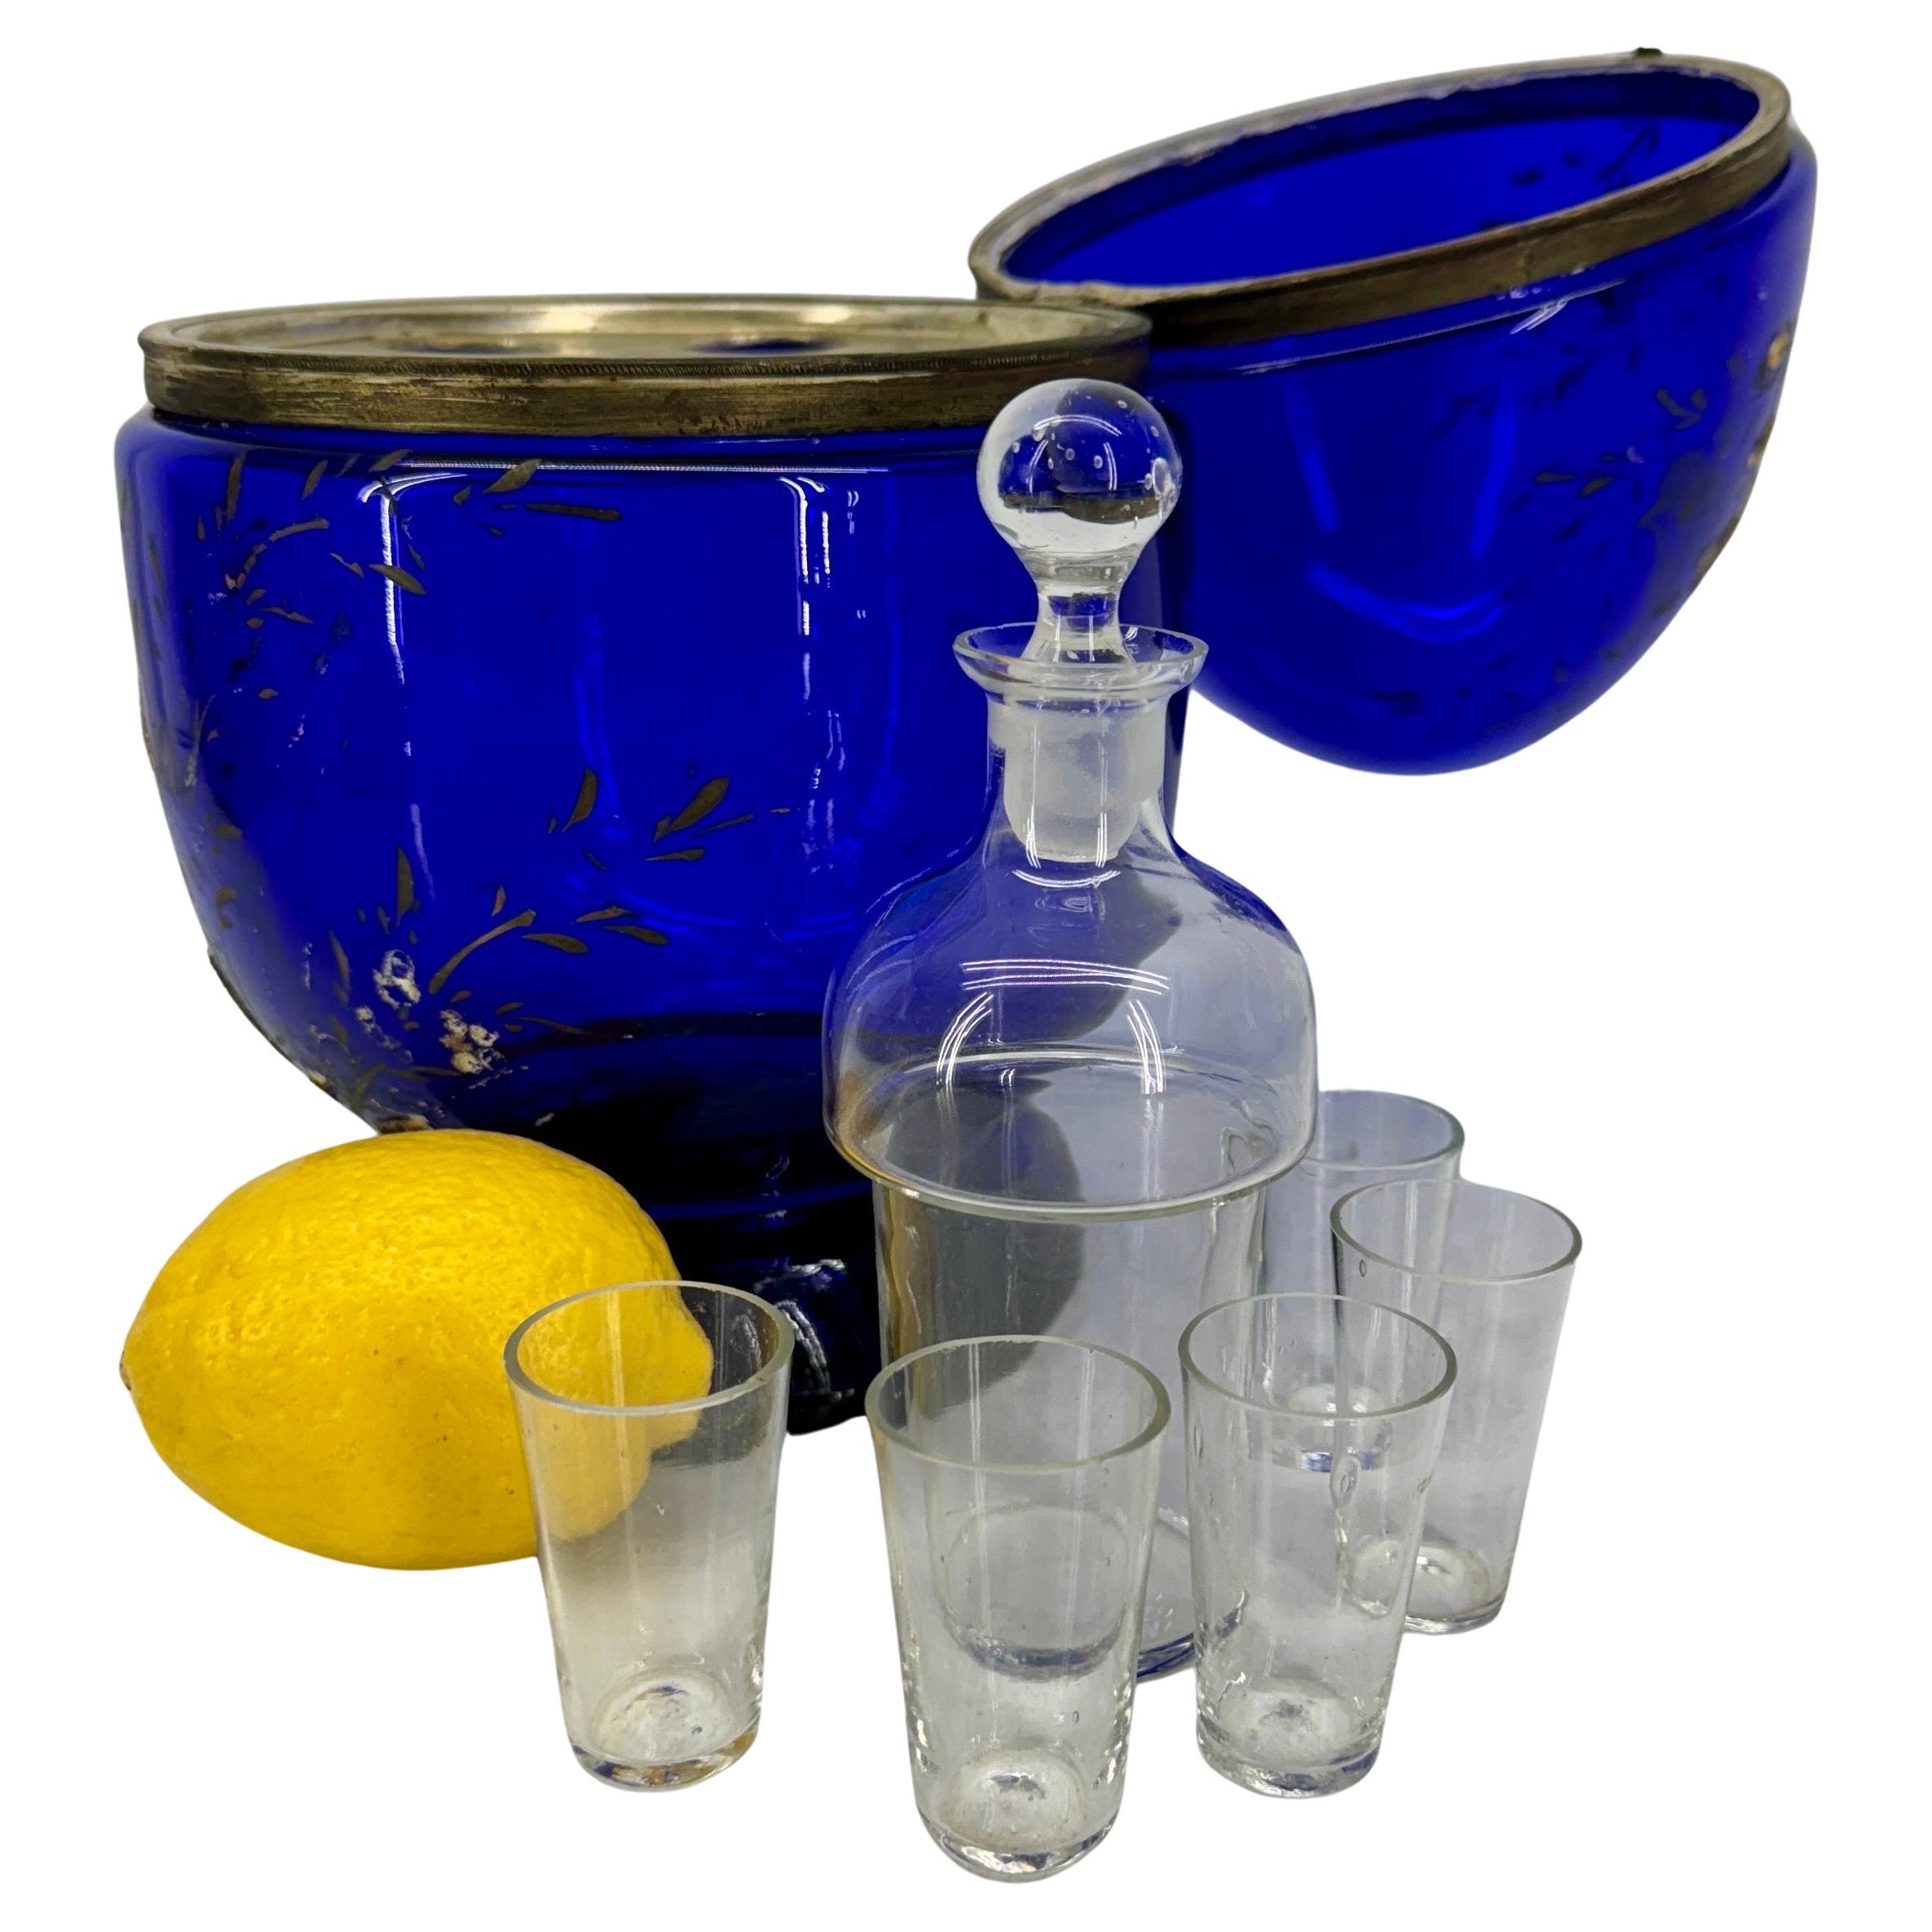 Blue Glass Art Hinged Egg Domed Liquor Decanter 

Striking cobolt blue decanter with shot glasses. A great statement piece to elevate your bar cart. 